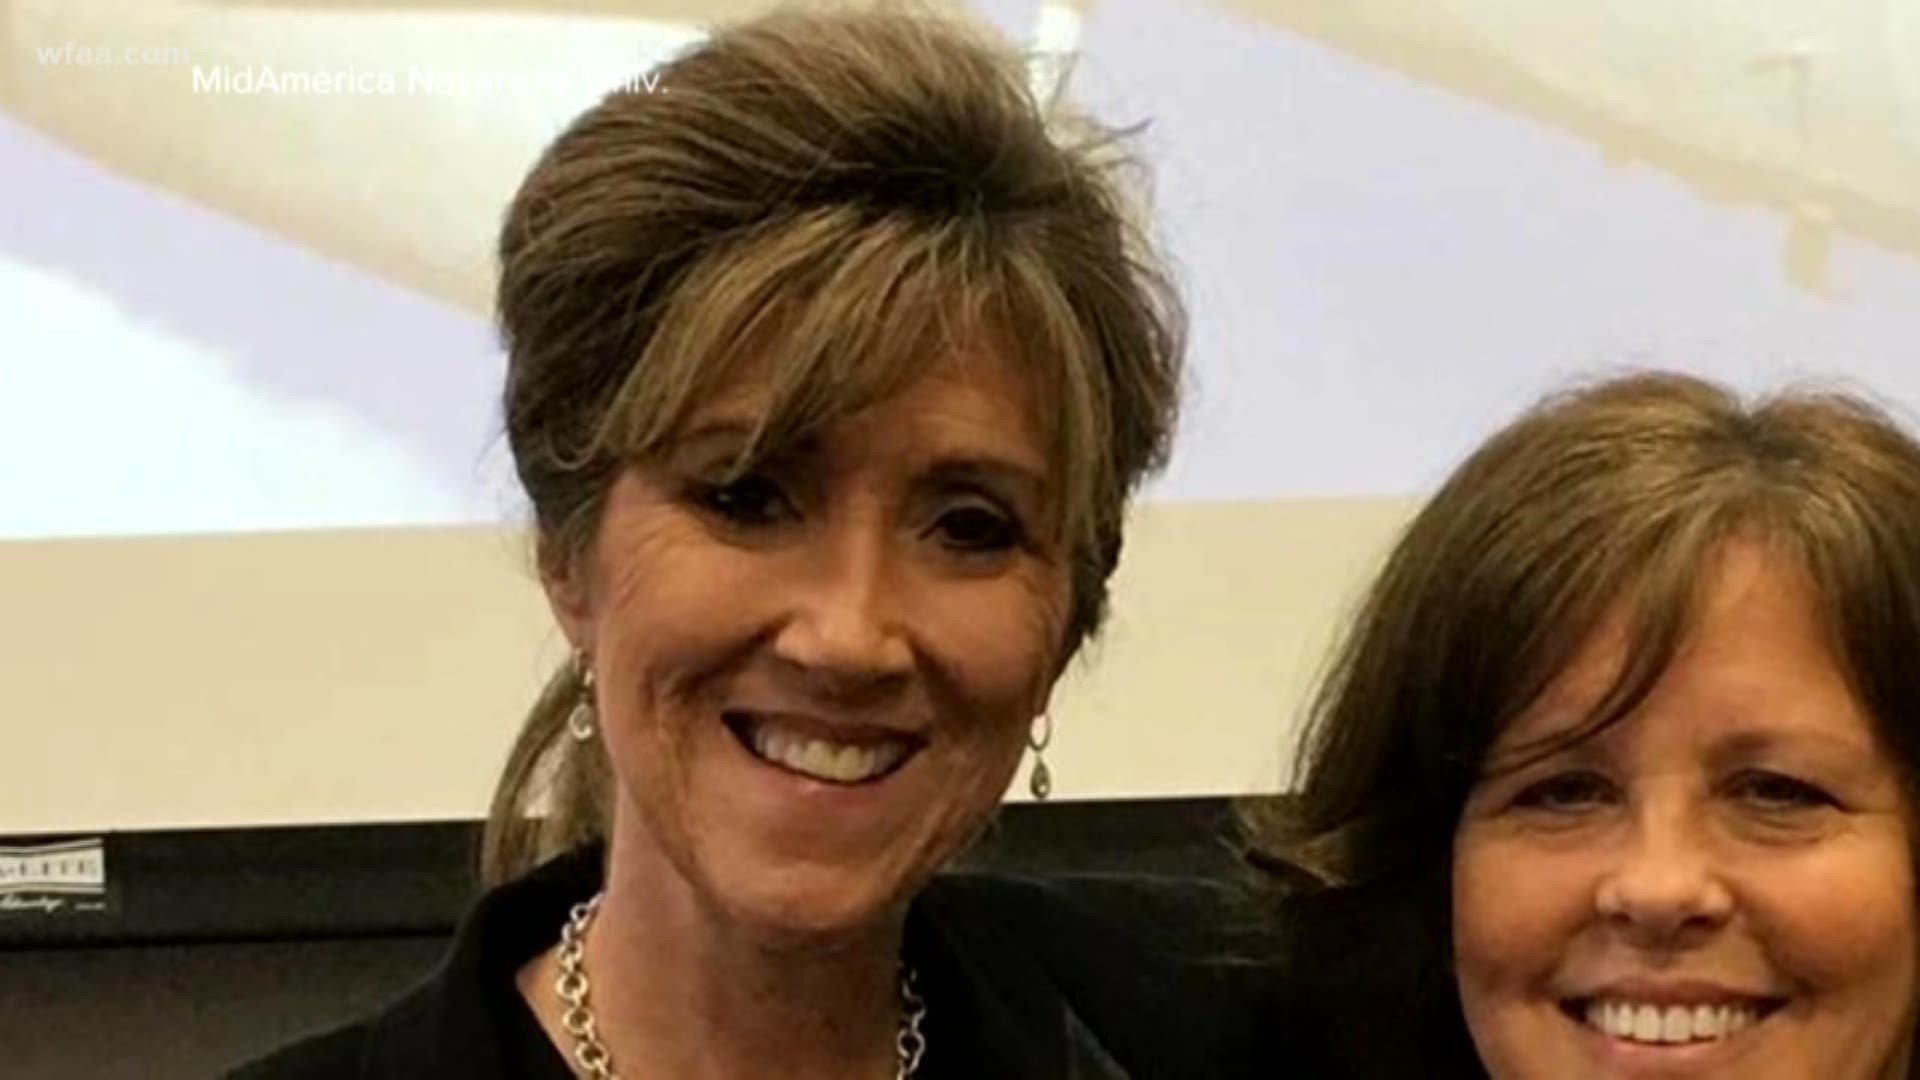 Capt. Tammie Jo Shults has been praised for safely landing the plane.